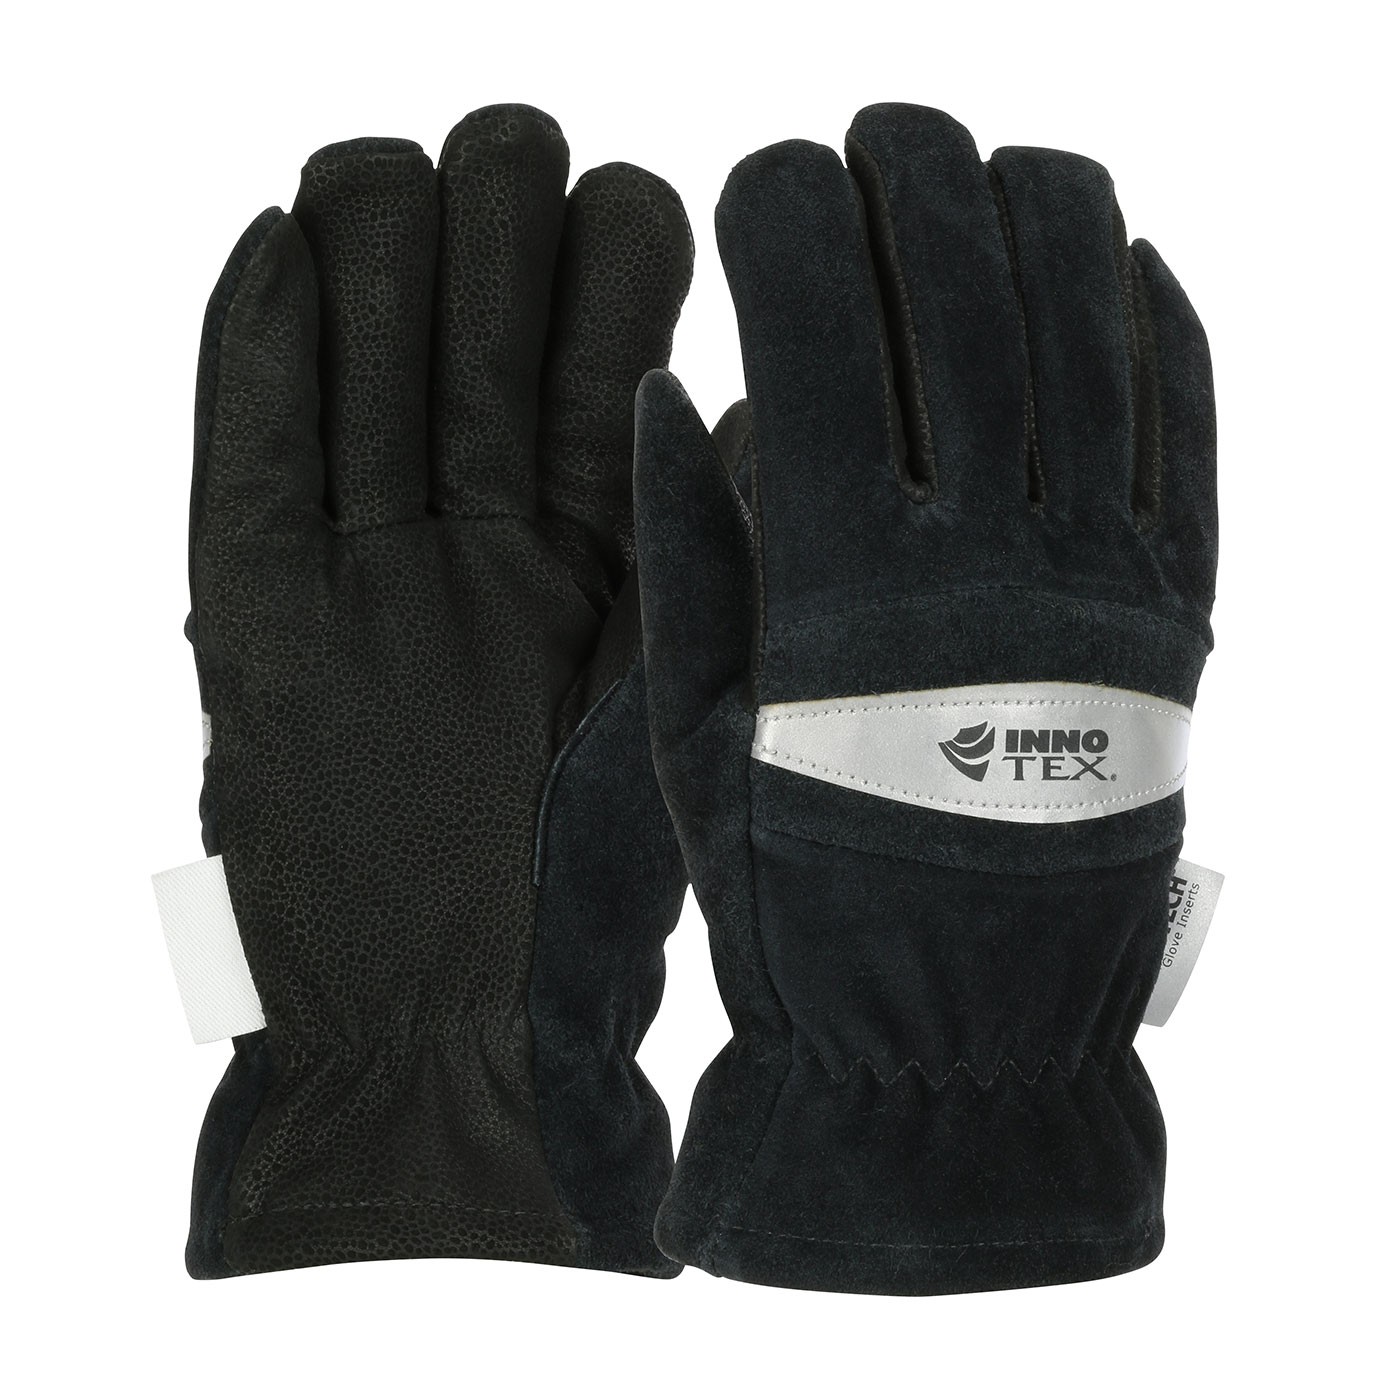  INNOTEX855™ Structural Firefighting 2D Glove with Kangaroo Leather Palm, Split Cowhide Leather Back and Kevlar® Stitching  (#910-P855)